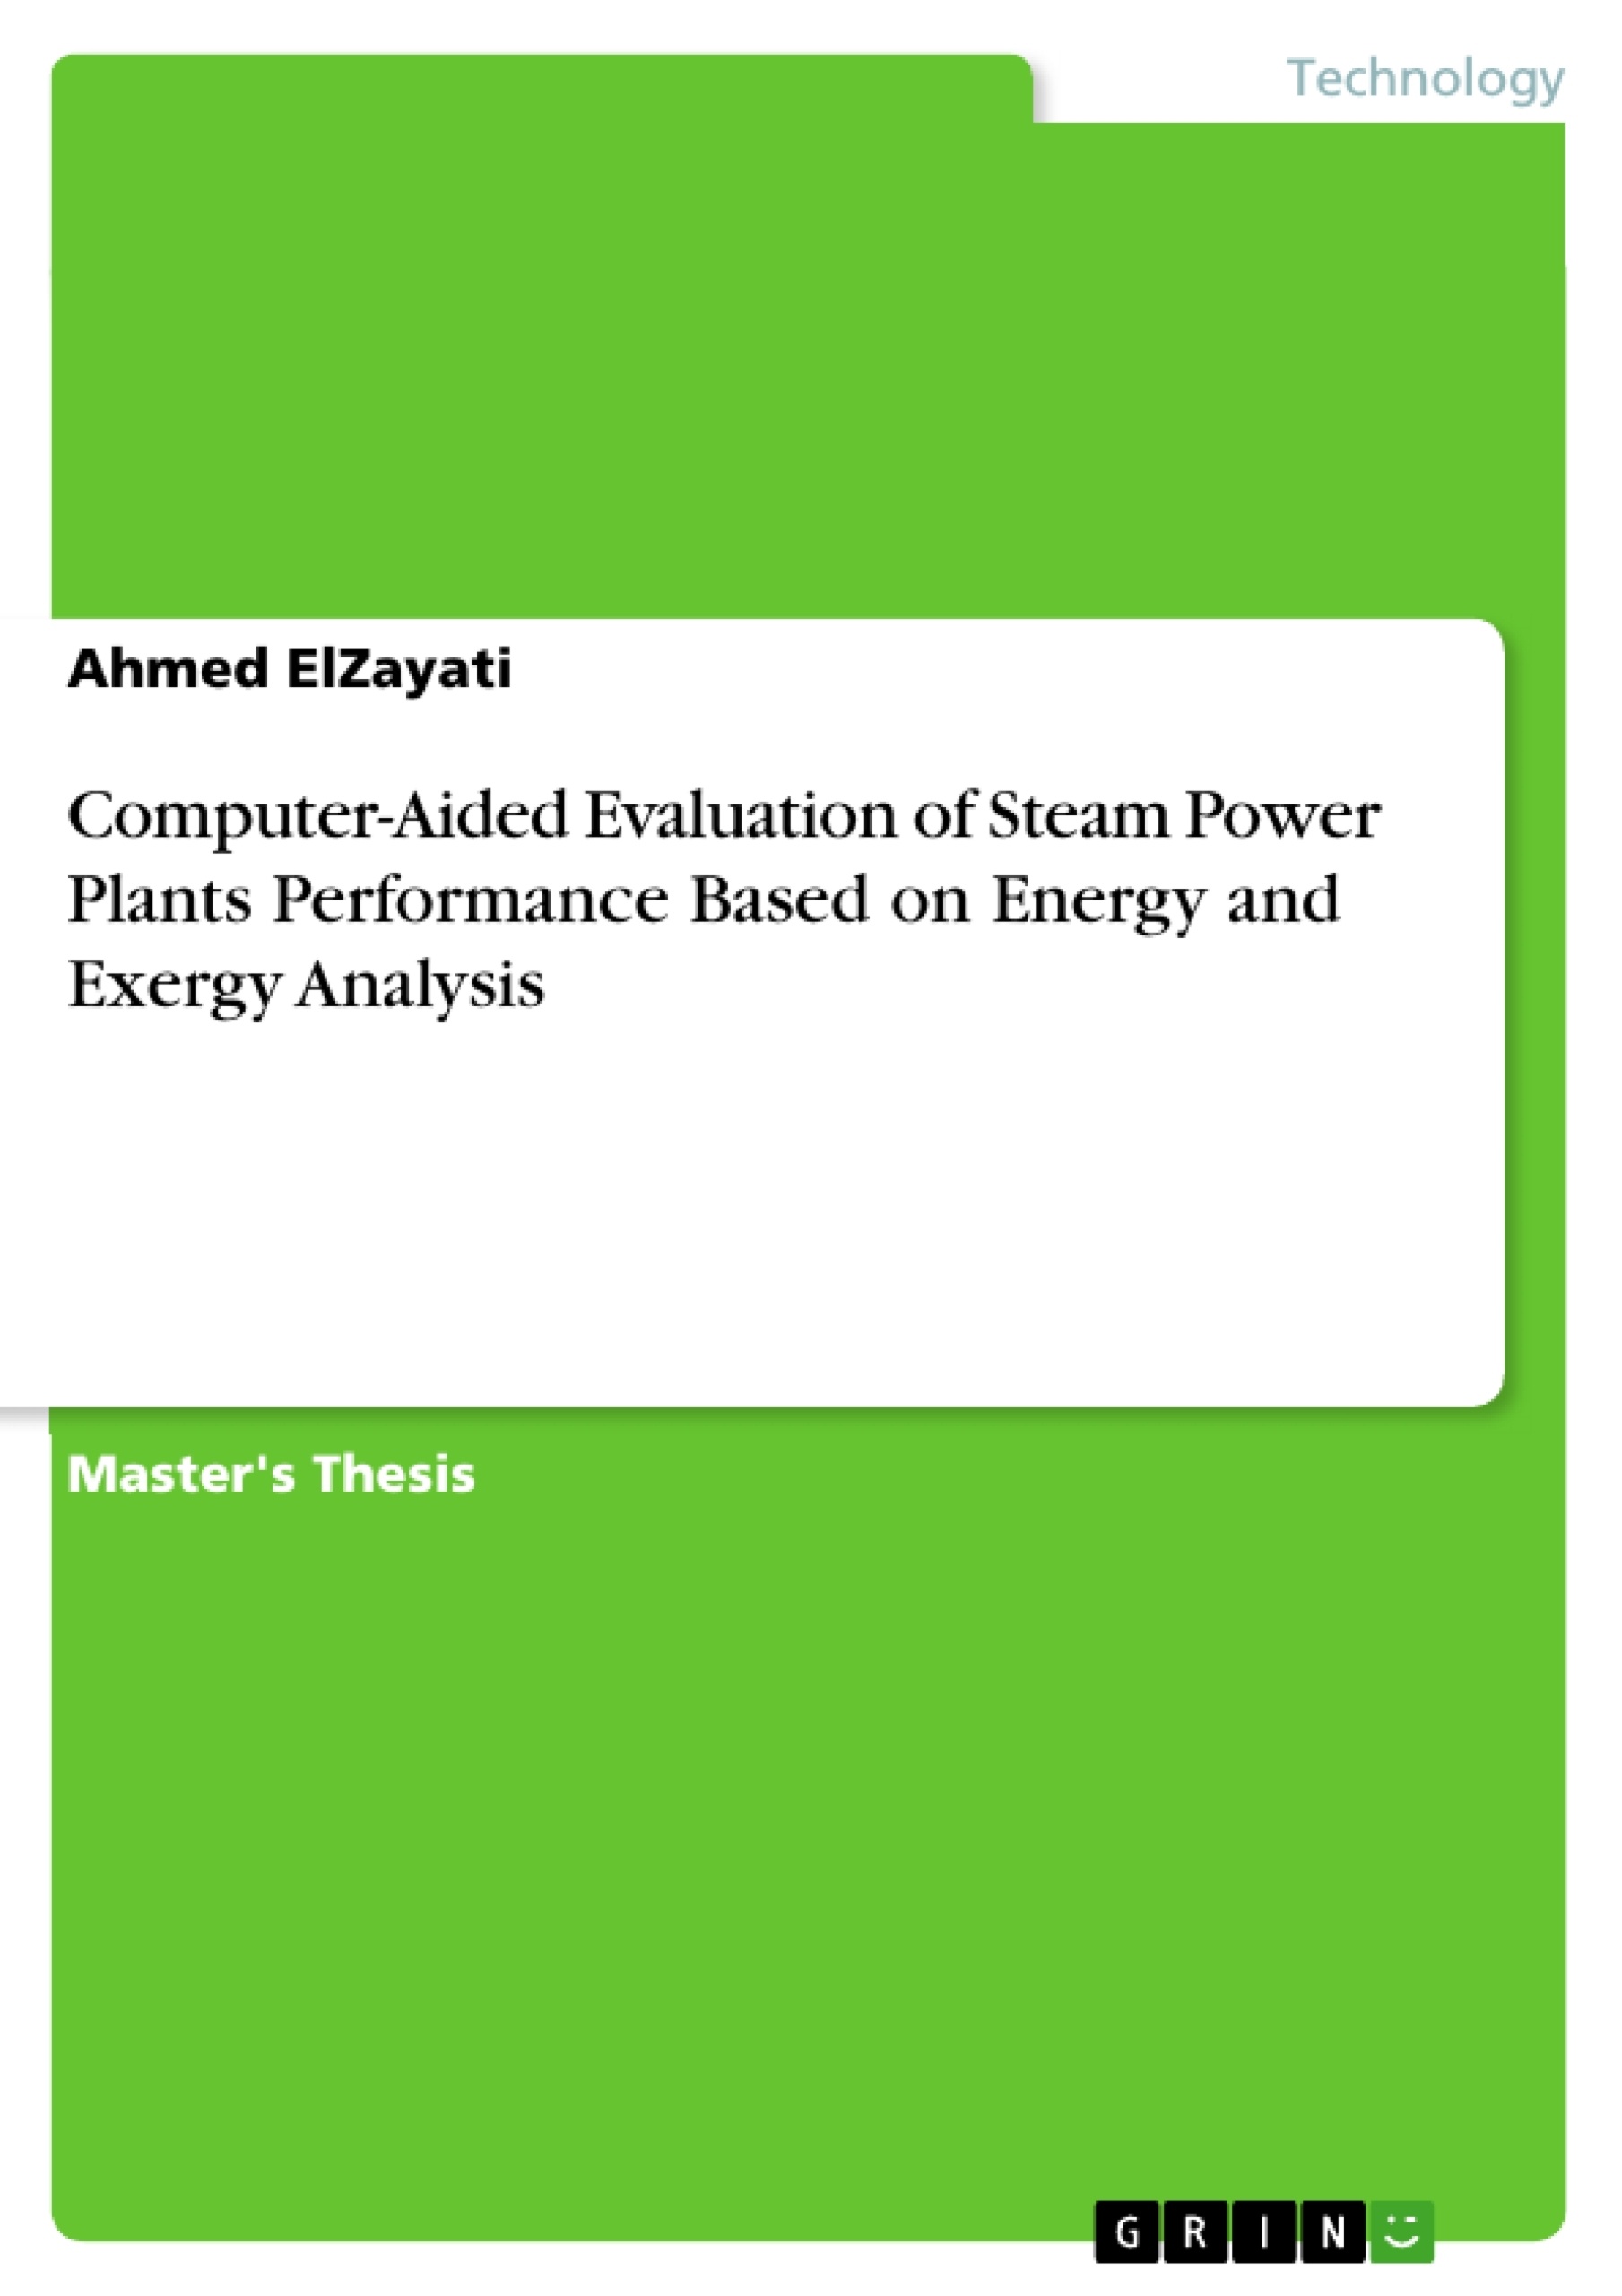 Title: Computer-Aided Evaluation of Steam Power Plants Performance Based on Energy and Exergy Analysis